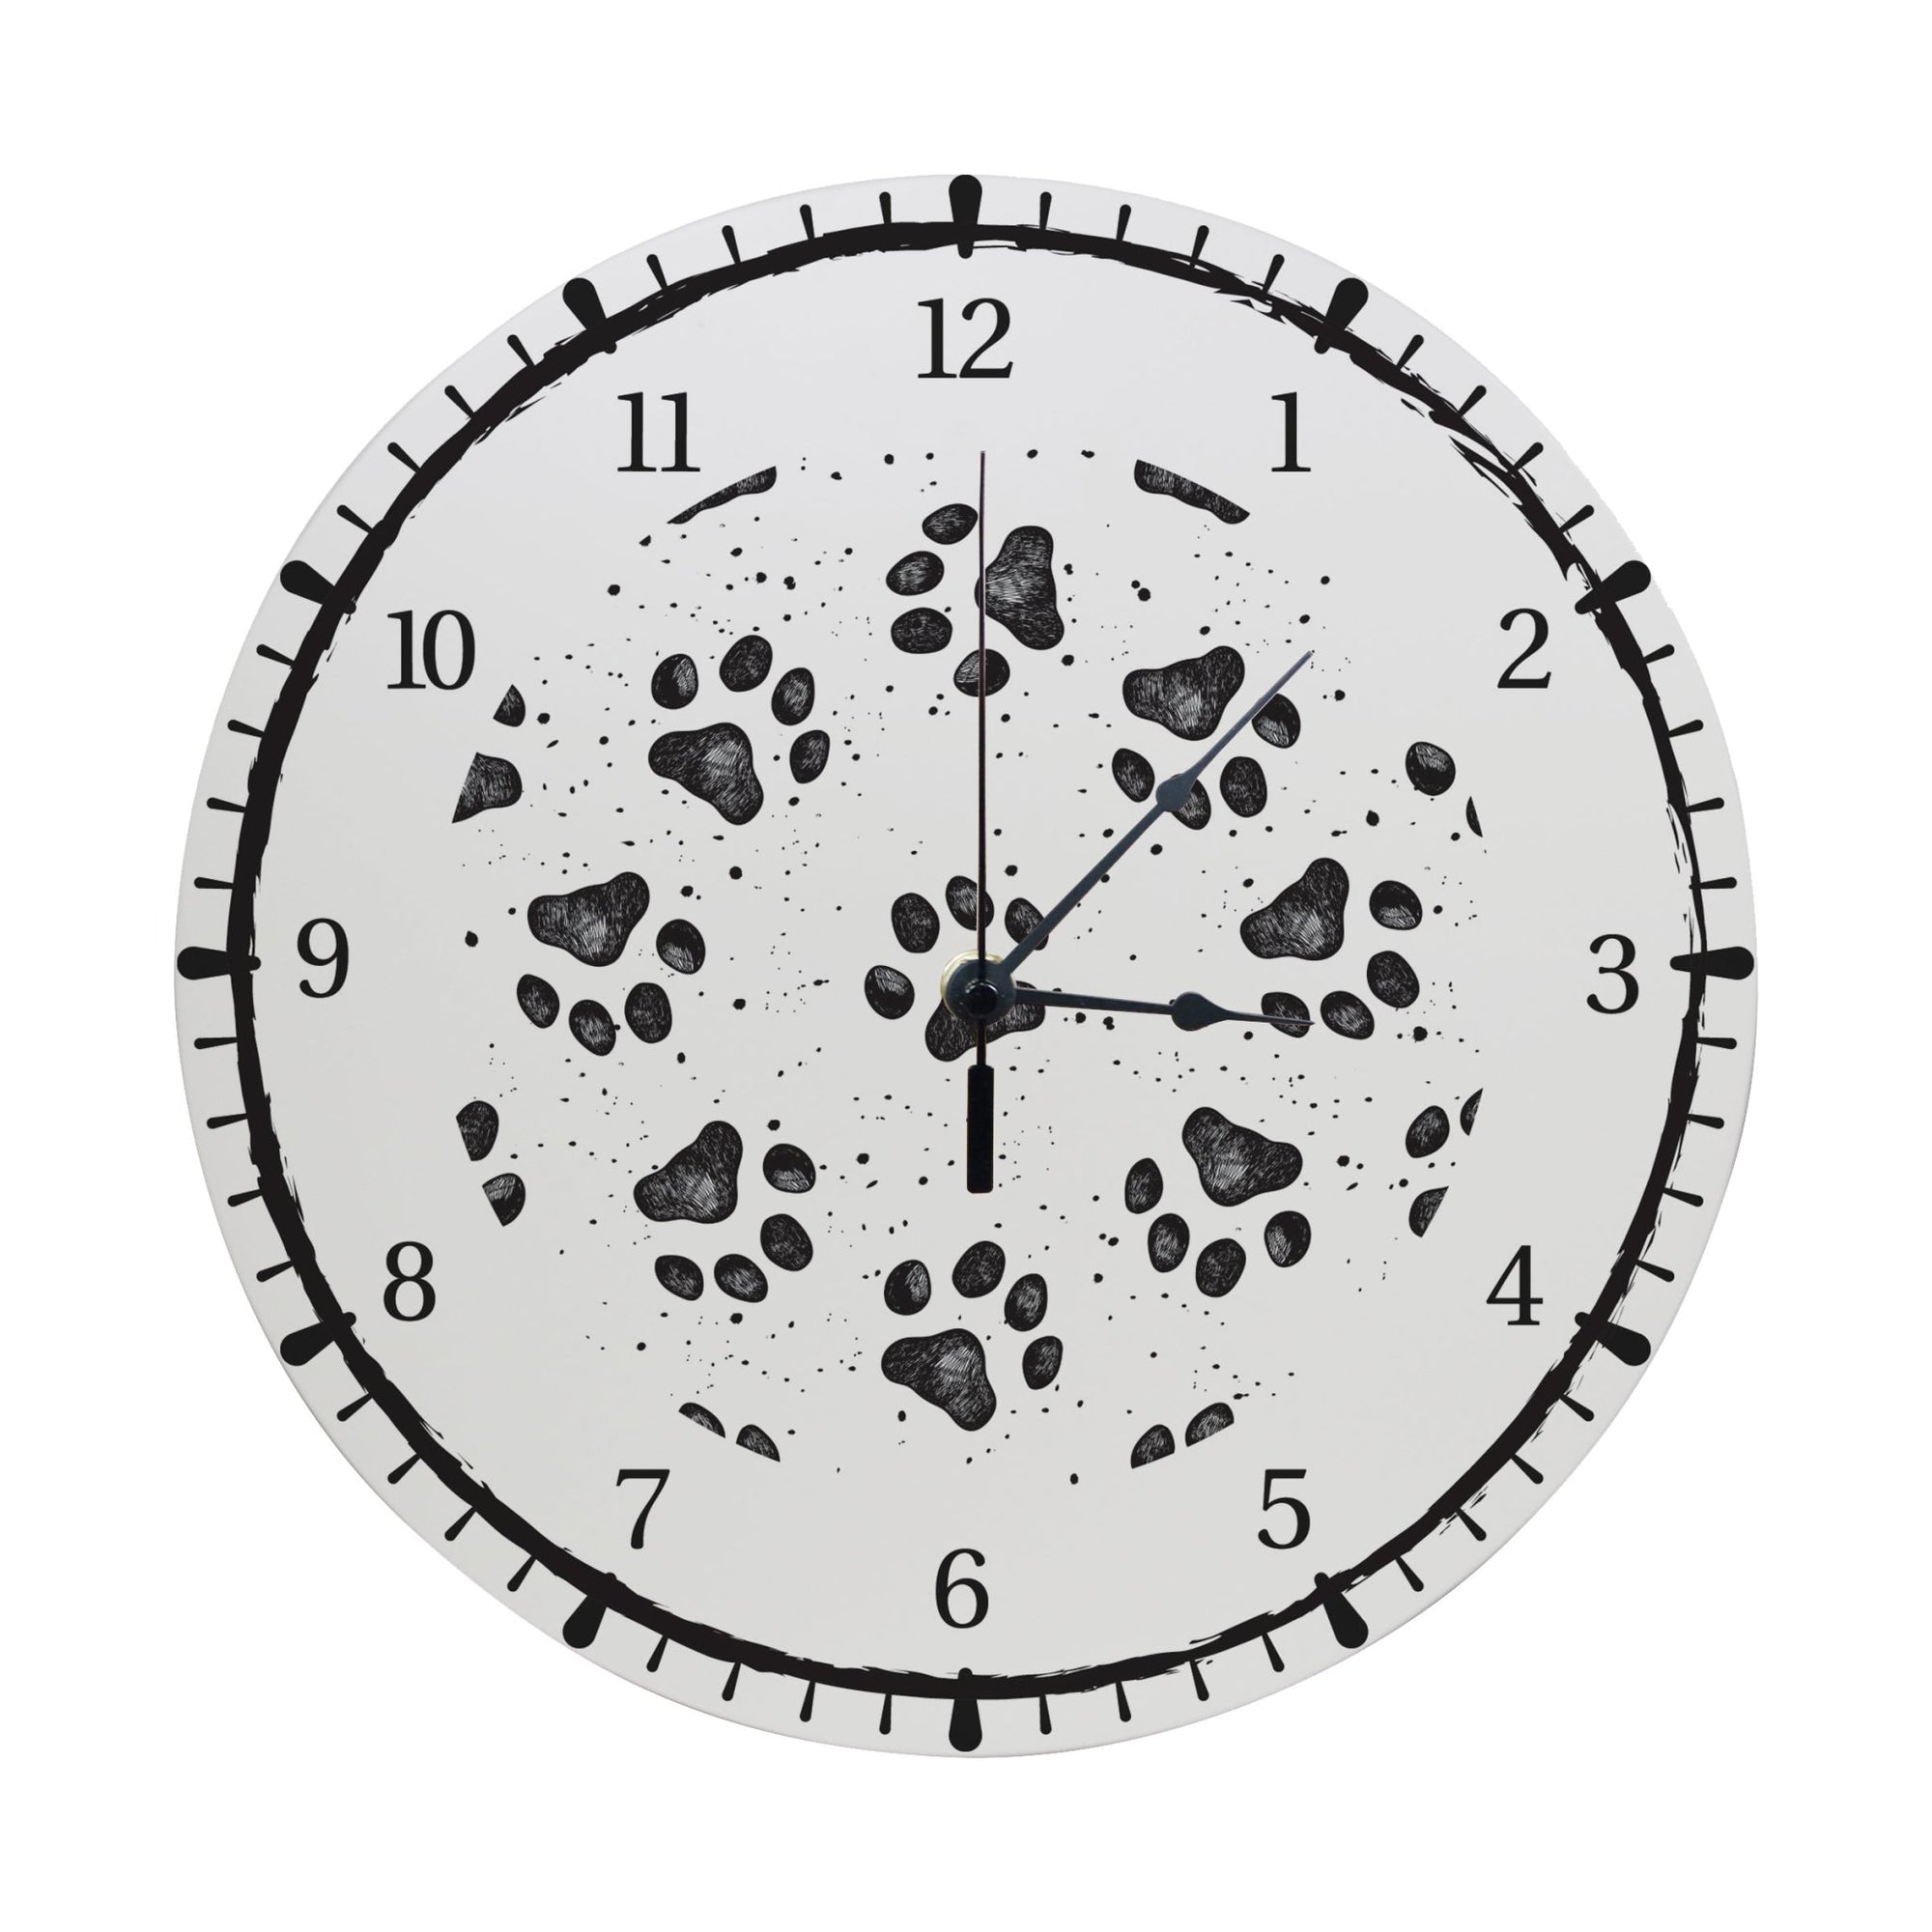 Minimalist Roman Numeral Wooden Clock For Walls Or Countertop Display For Pet Owners - Paws - LifeSong Milestones